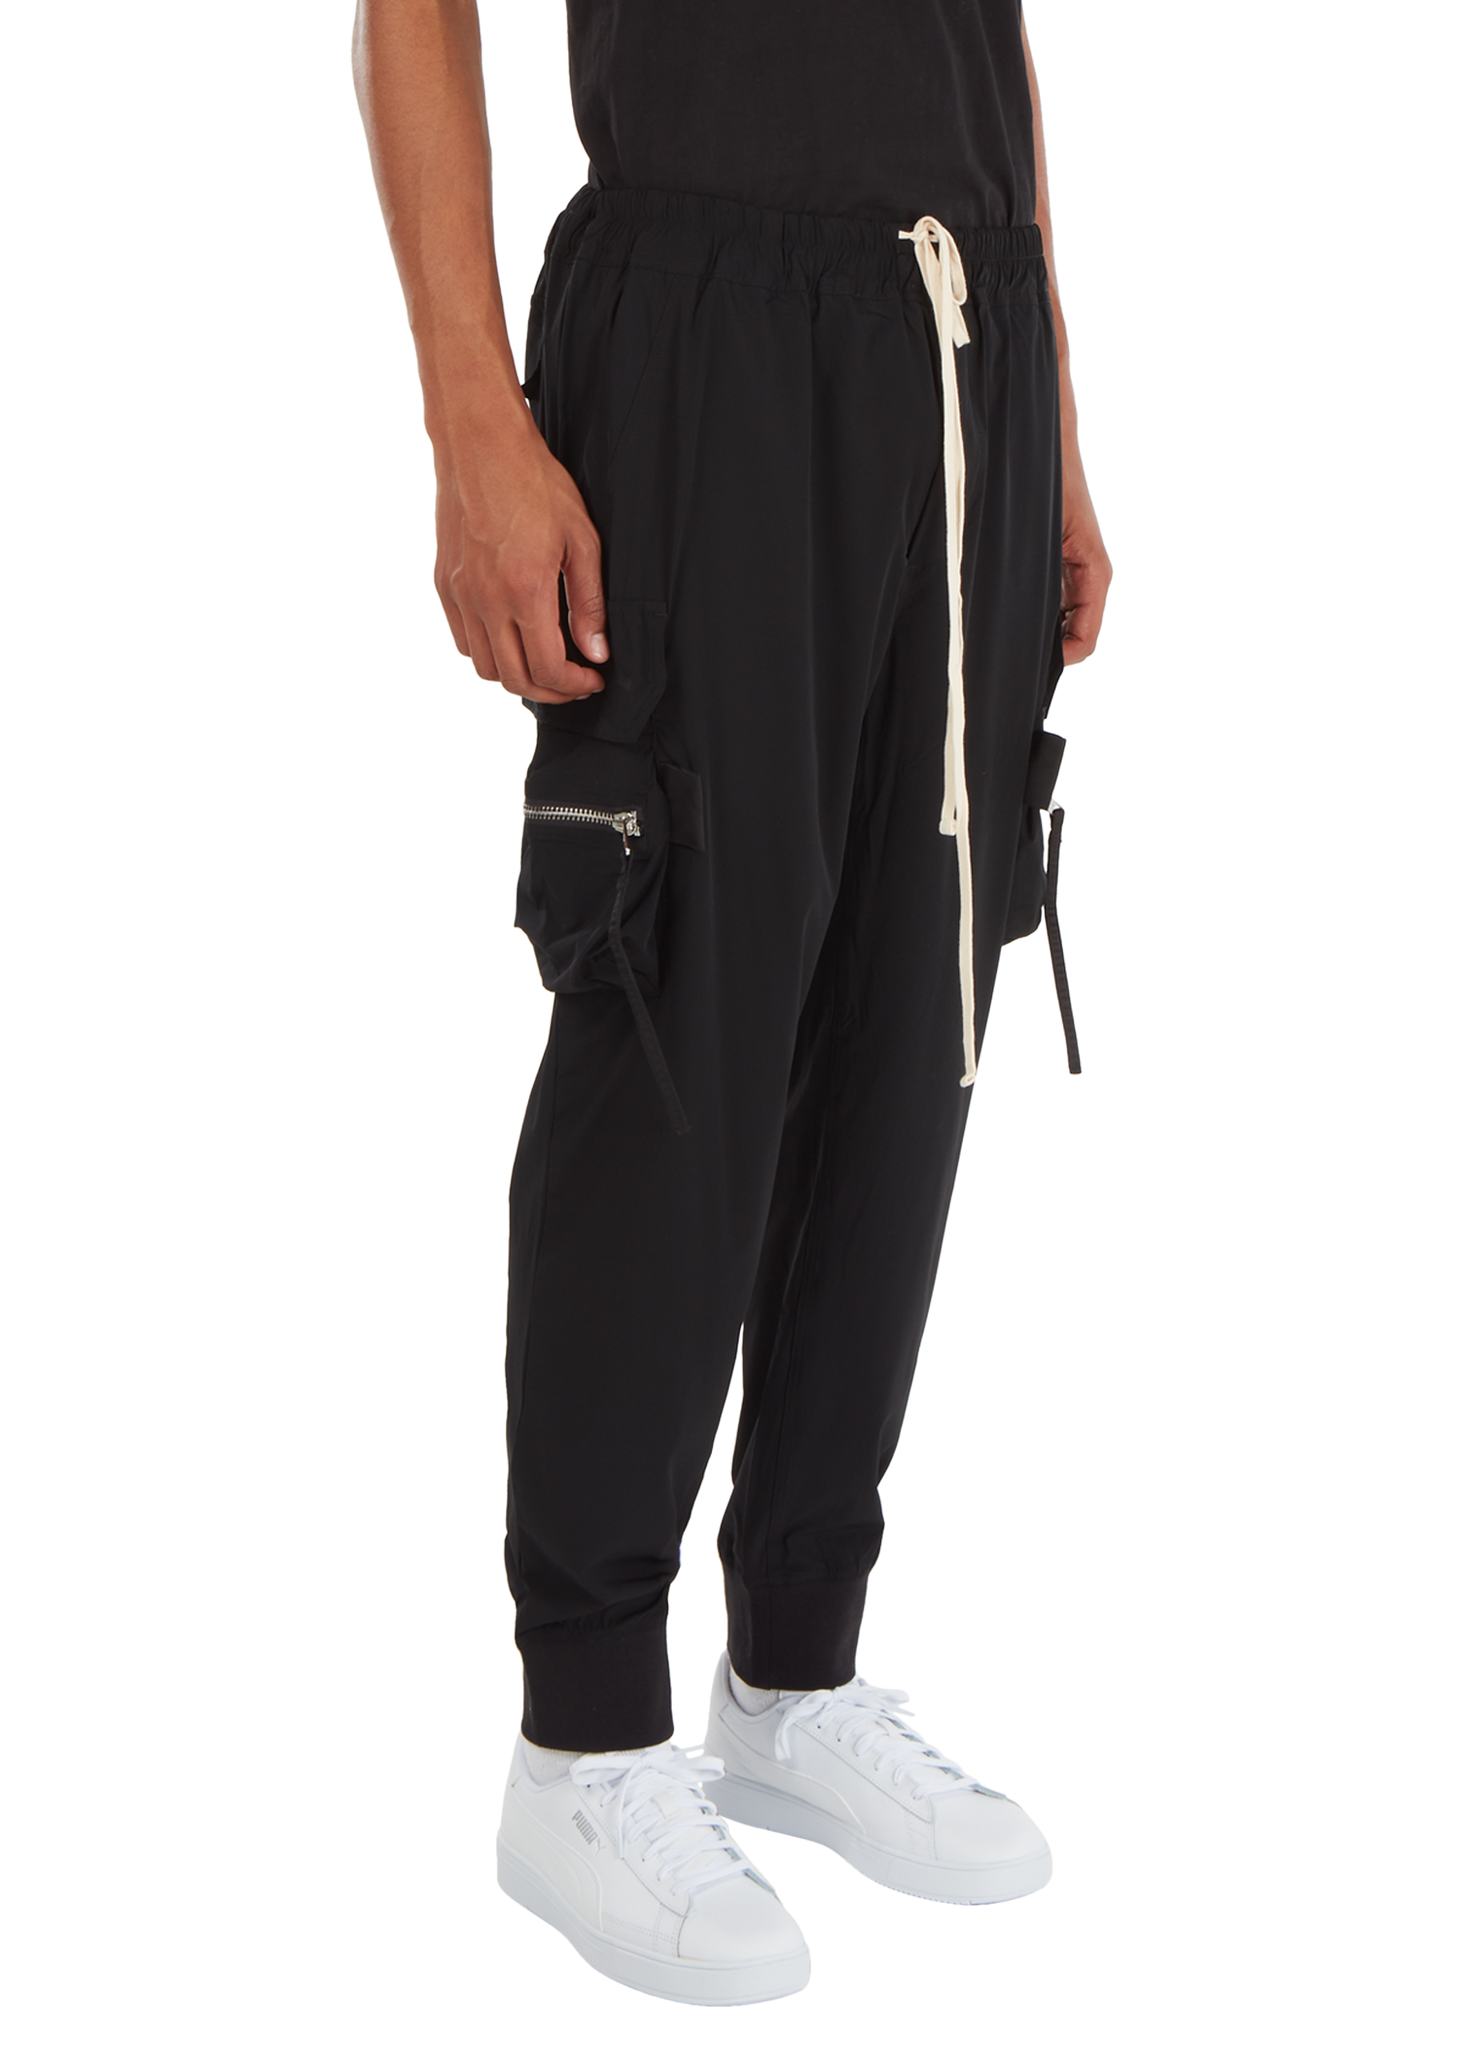 Fflirtygo Women's Cotton Track Pants, Joggers for Women, Women�s Leisure  Wear, Night Wear Pajama, Small Size Grey Color with Black Stripe and  Pockets for Sports Gym Athletic Training Workout : Amazon.in: Clothing